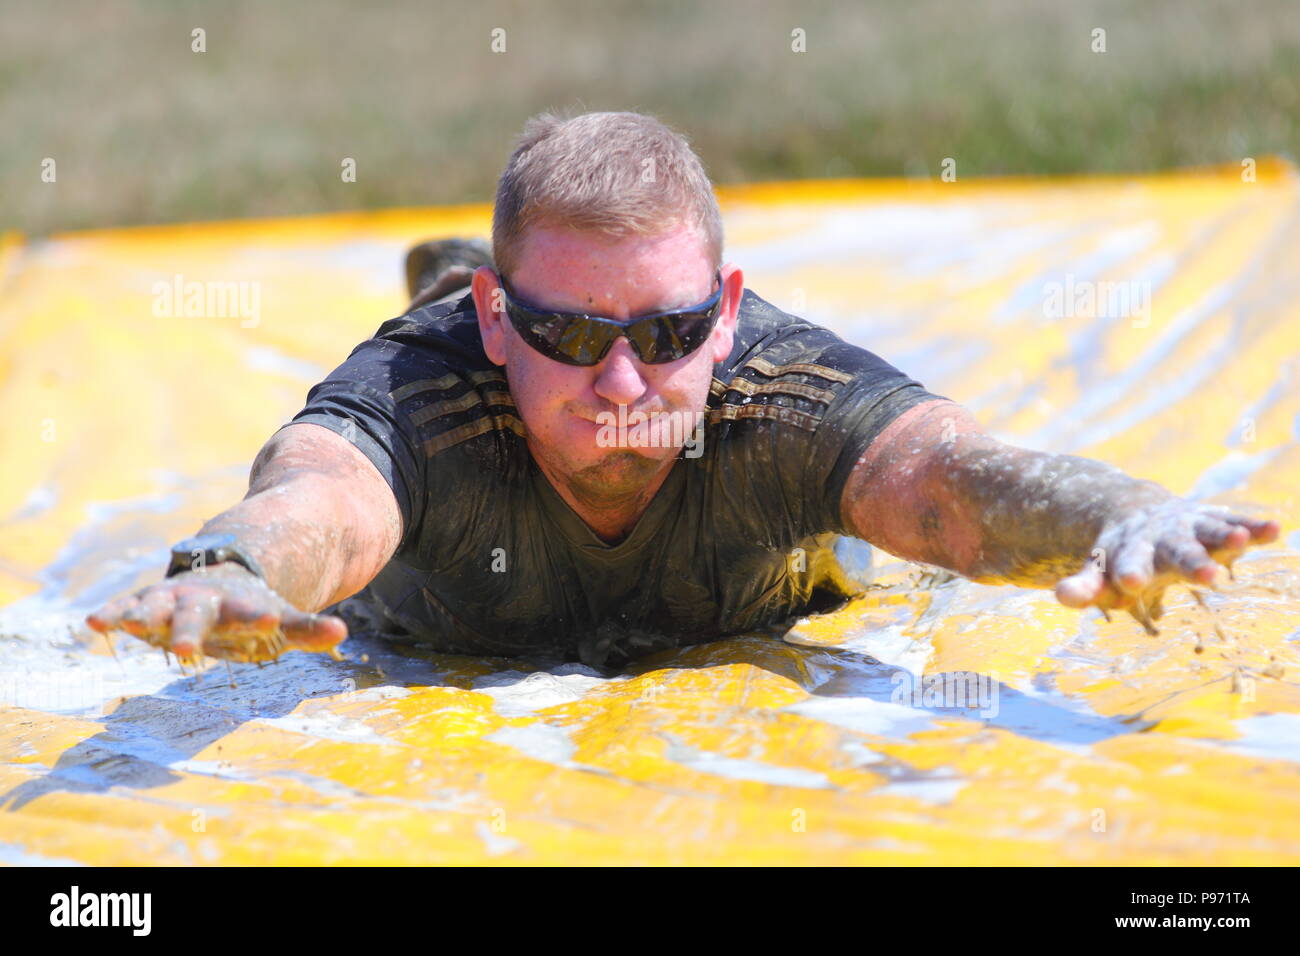 A man takes his tuen on a mud slide during a Young Mudder event in Leeds which participants can choose to do a 2.5k or 5k muddy obstacle course. Stock Photo